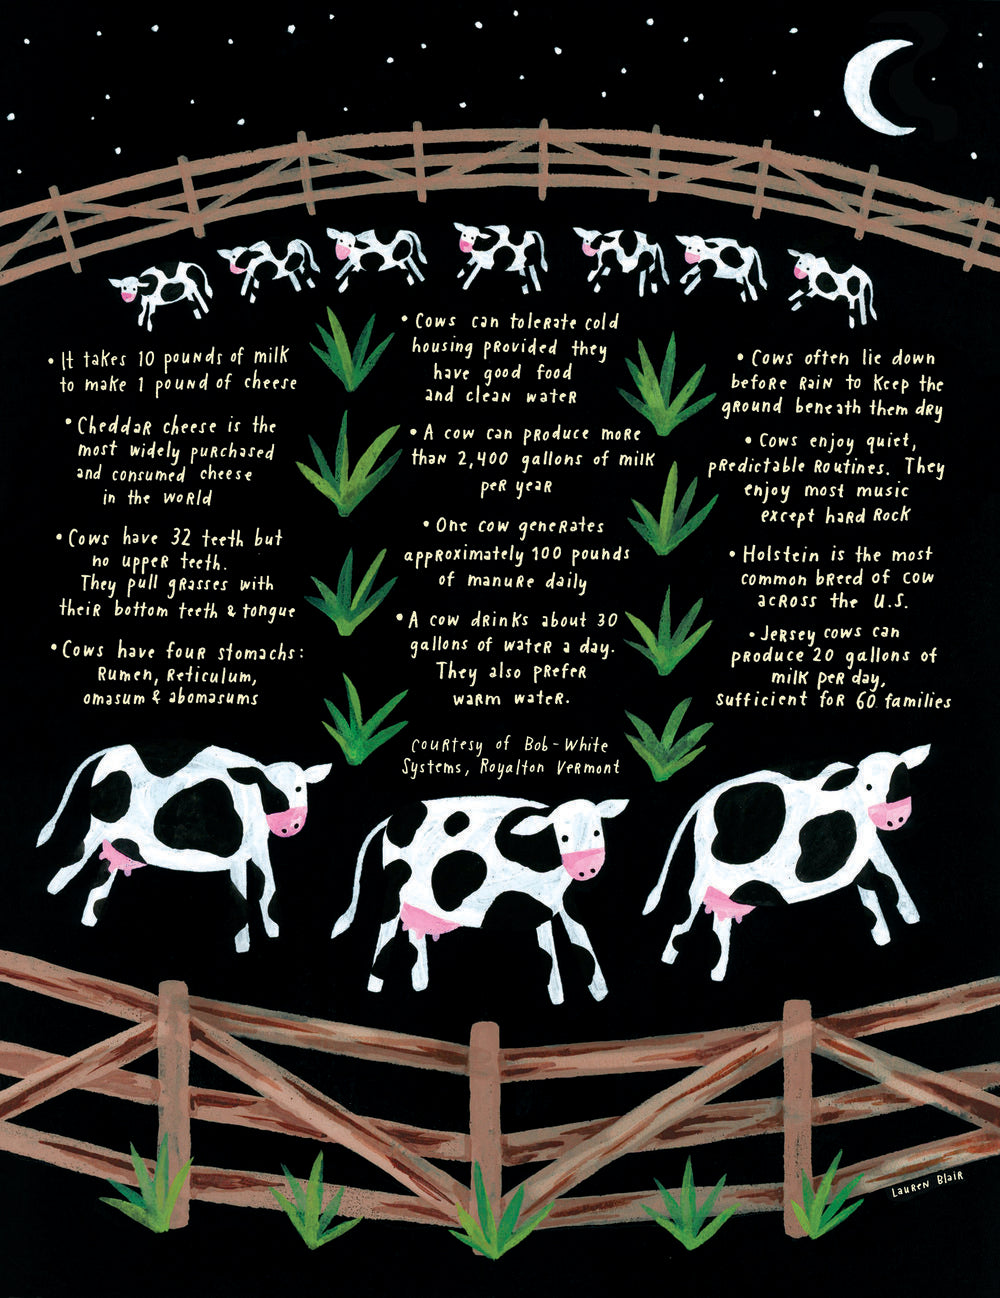 Cows Final Facts poster by Lauren Blair 